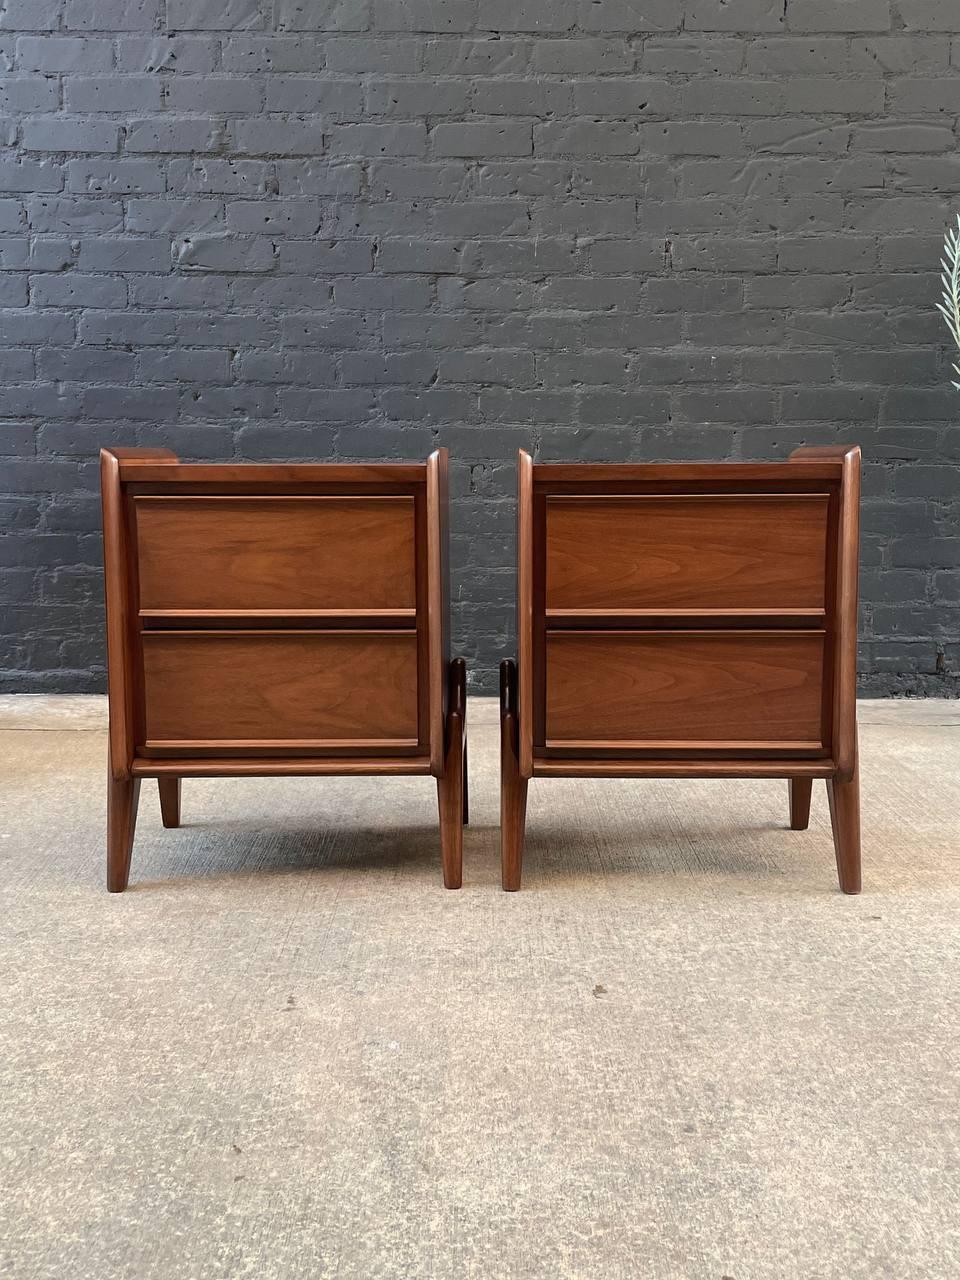 Newly Refinished - Pair of Mid-Century Modern Sculpted Walnut Night Stands 1